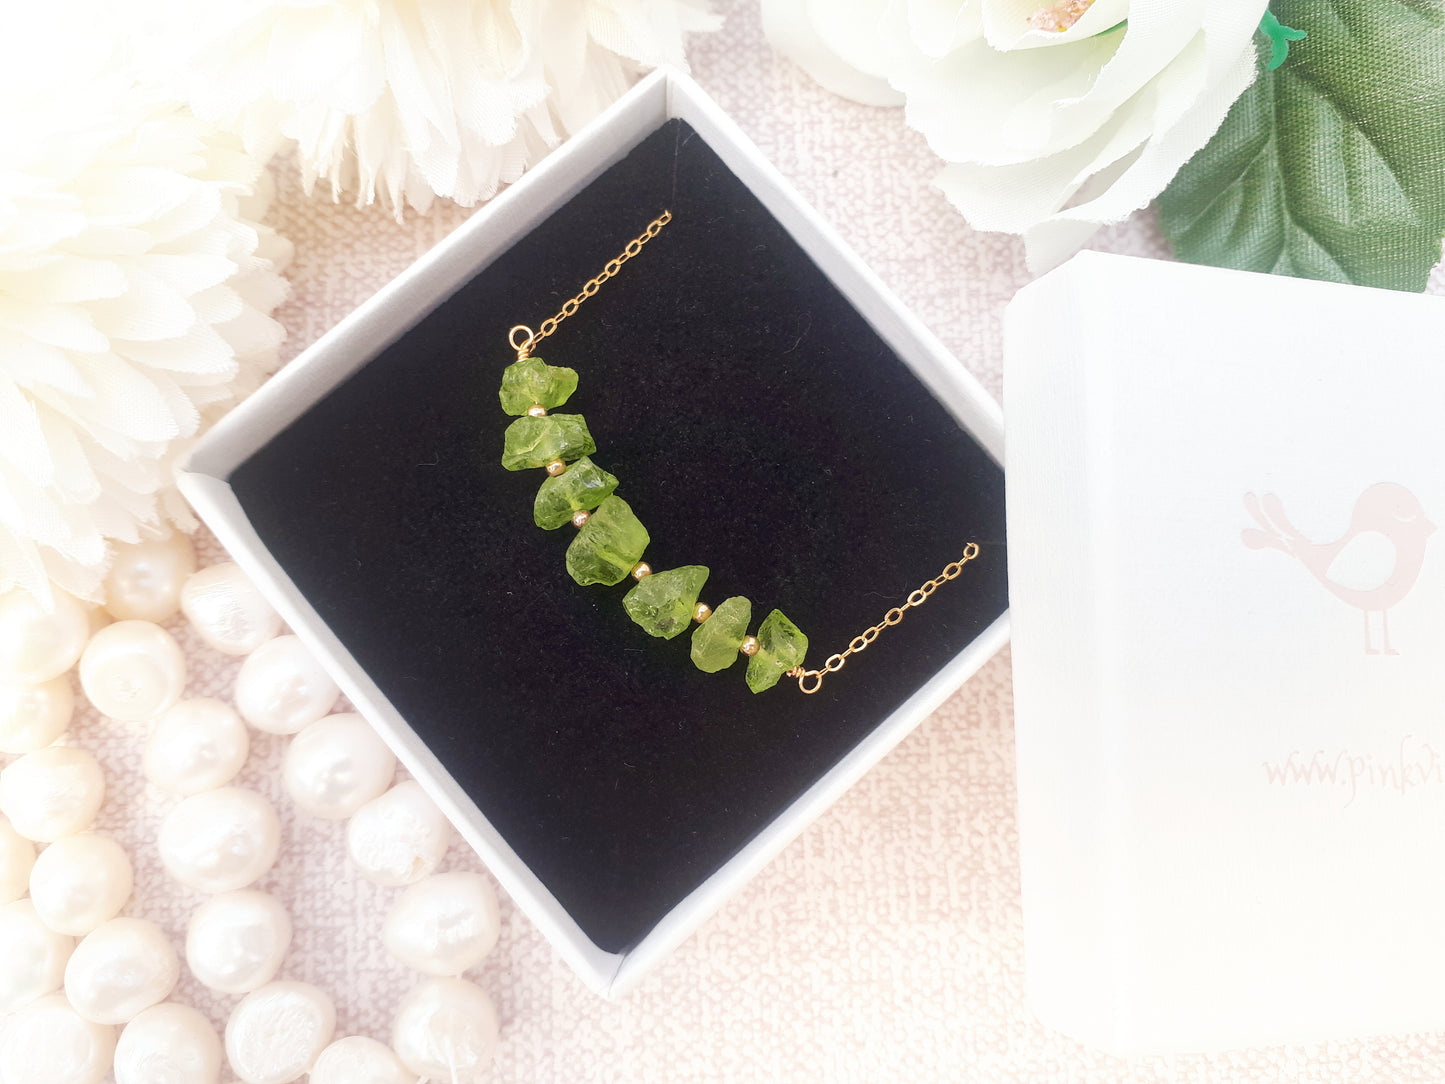 Raw peridot necklace in sterling silver or gold.